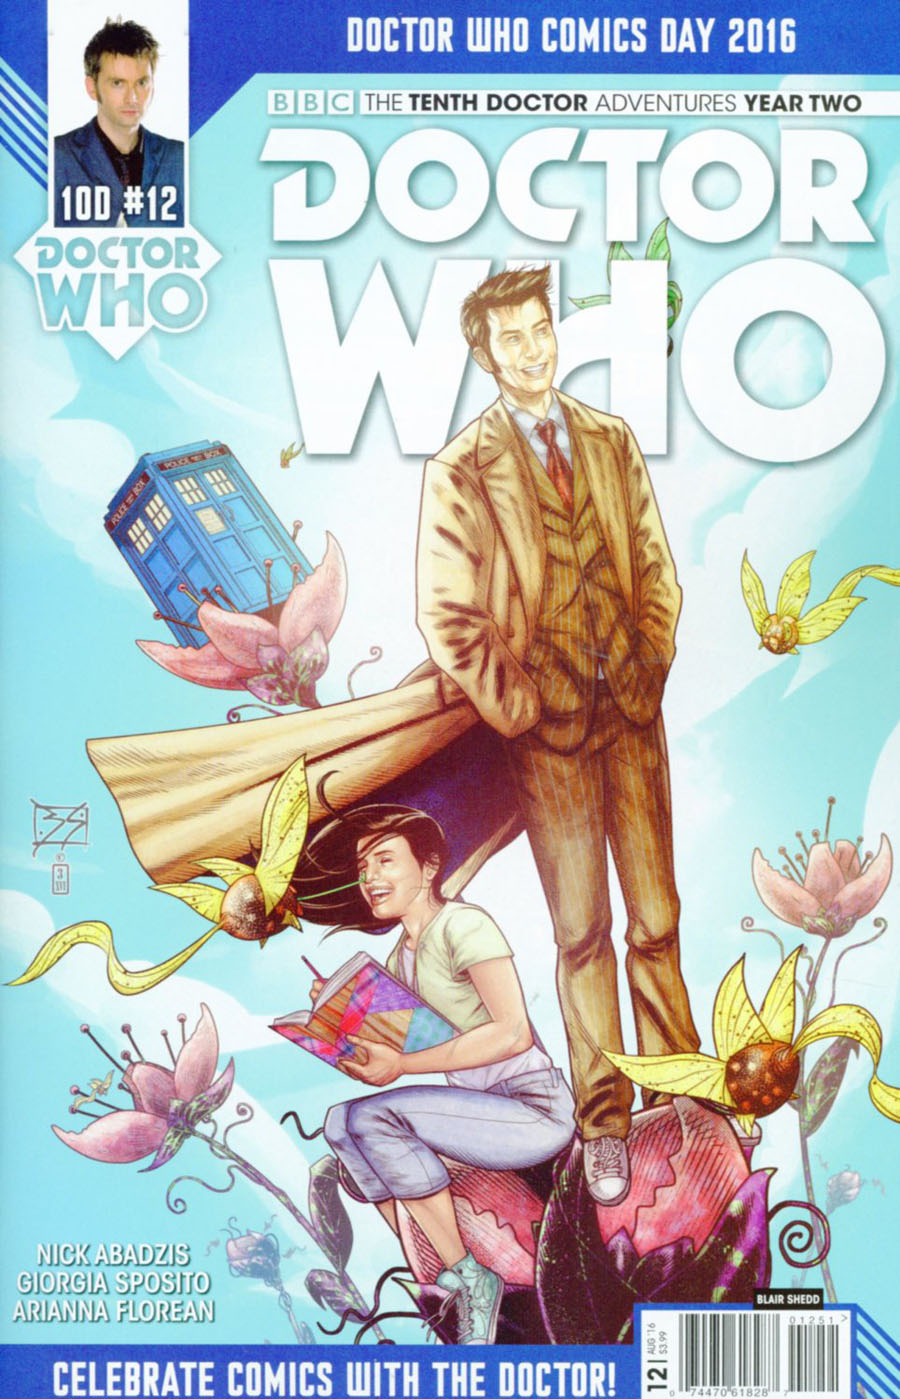 Doctor Who 10th Doctor Year Two #12 Cover E Variant Blair Shedd Doctor Who Comics Day 2016 Cover